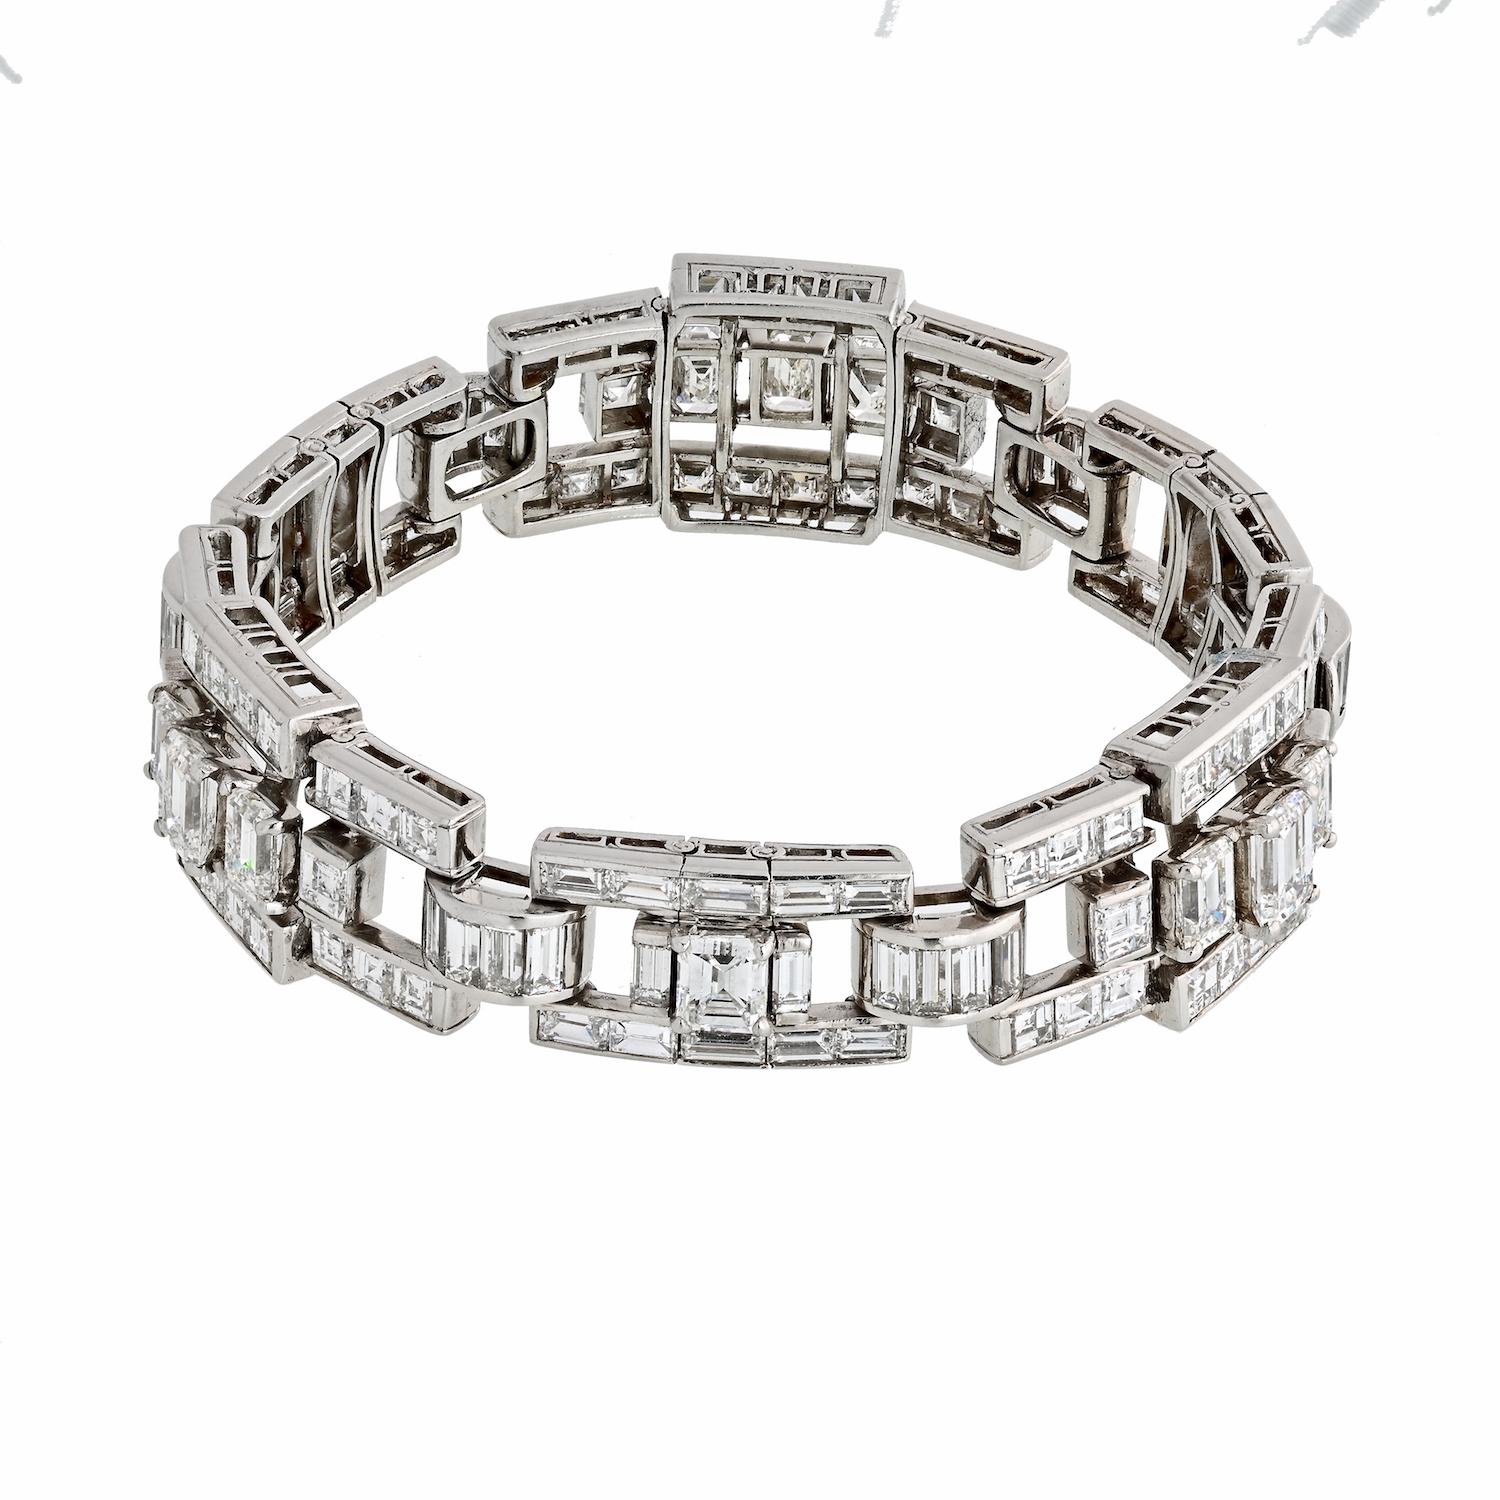 By Oscar Heyman, a magnificent mid-century diamond and platinum bracelet comprised of 30.63 carats of white diamonds. The bracelet stands as an ideal example of the elegance and abstract popularity of mid-century design, a jewelry aesthetic that